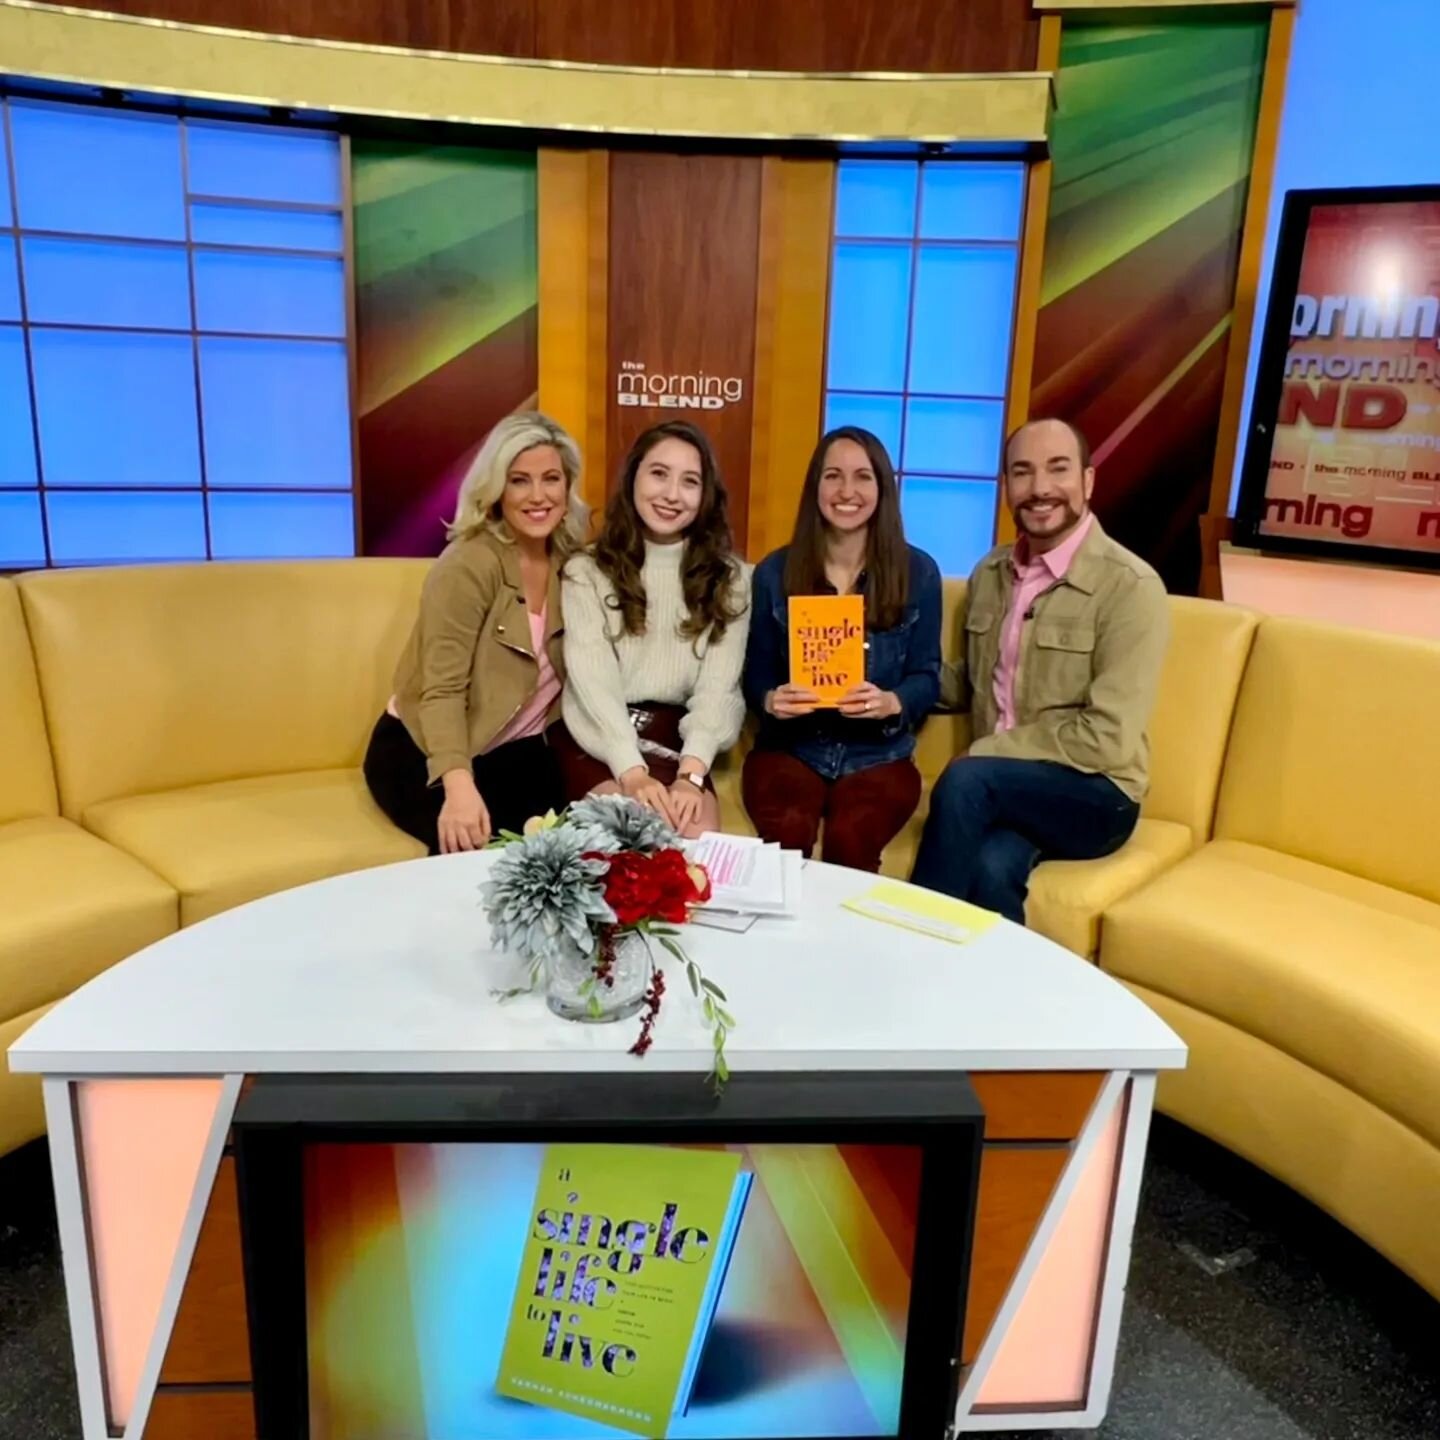 It was awesome going on The Morning Blend! ☕📺 Special thanks to @brittanyroux for coming with me! ☺️ Interview link in my bio

#tv #interview #coffee #tea #booklaunch #newbook #asinglelifetolive #friends #live #author #writing